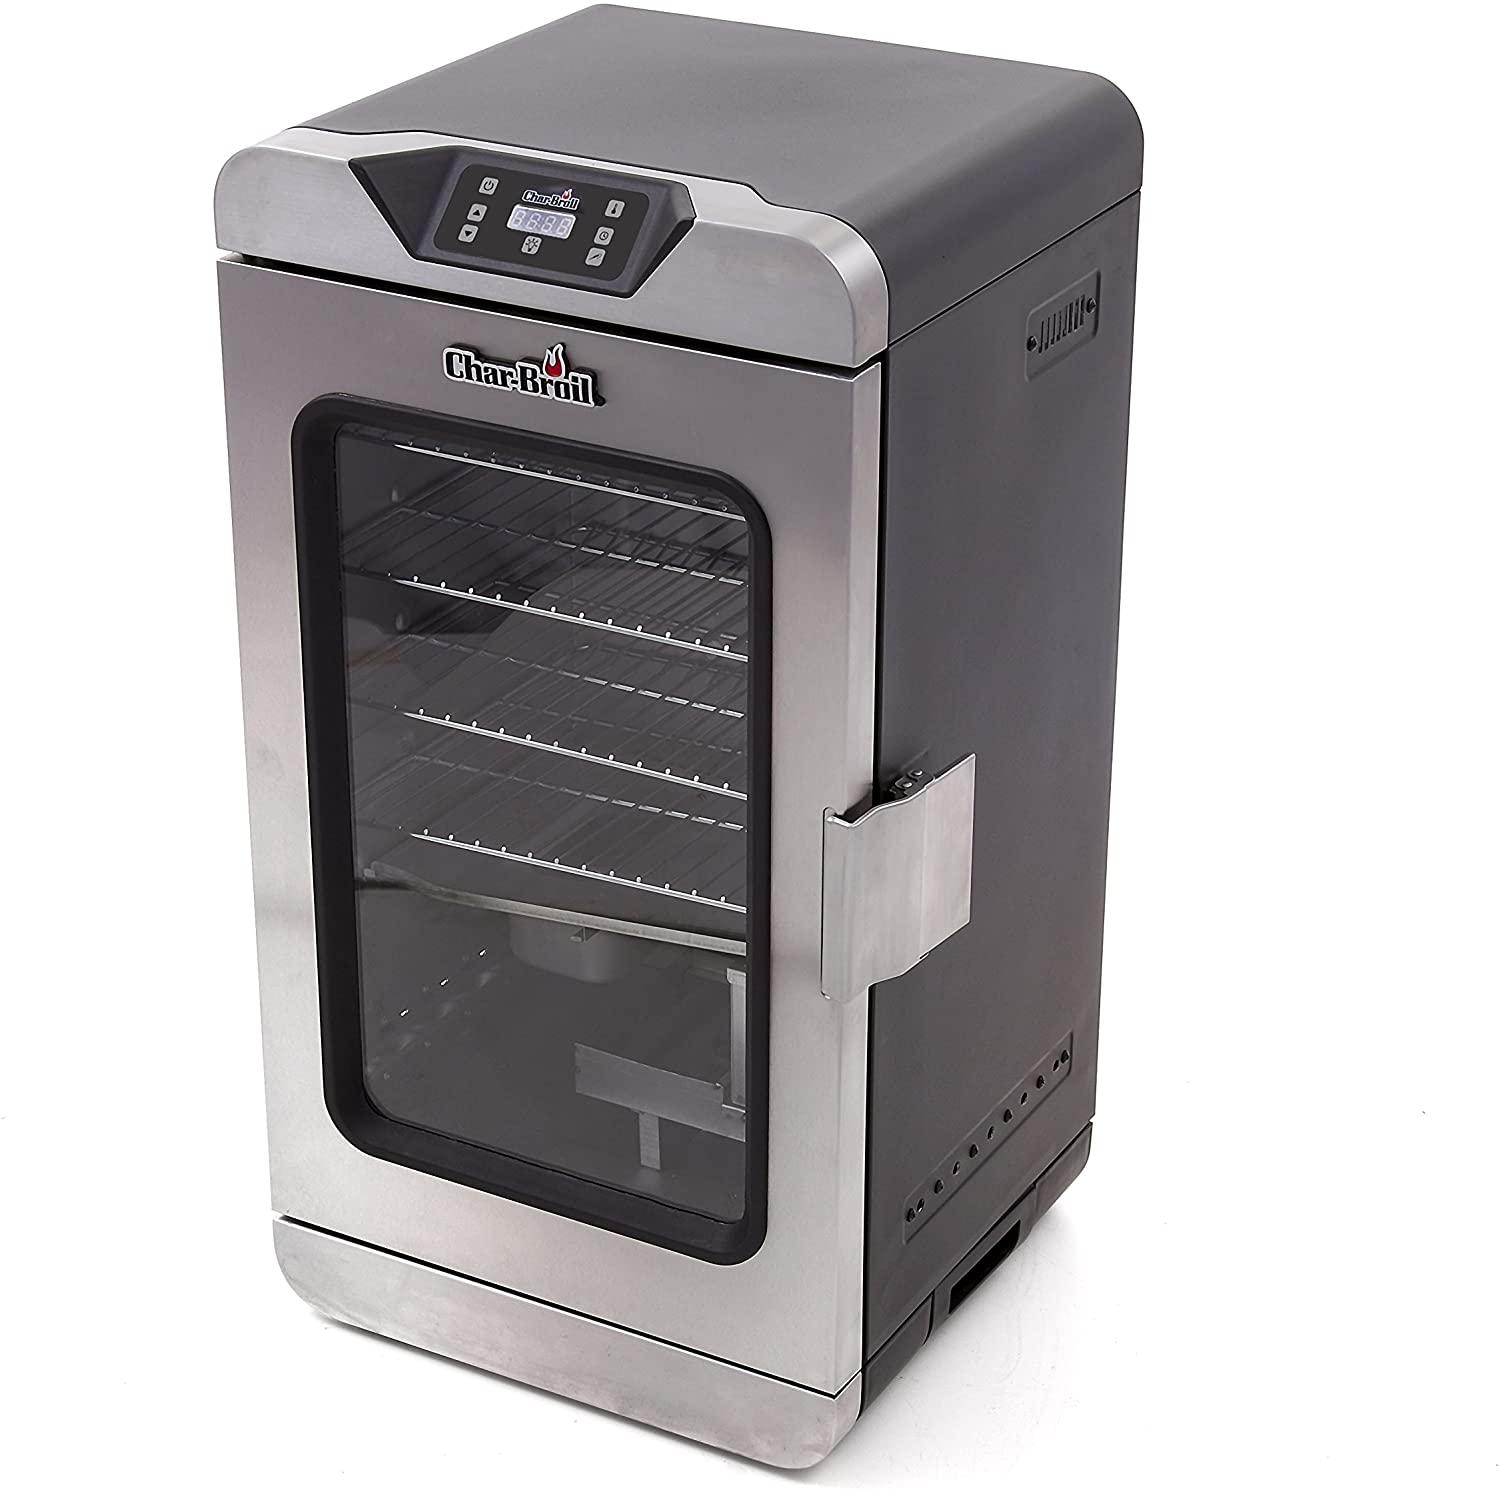 Char-Broil Deluxe Digital Electric Smoker $143.99 + Free Shipping ~ Amazon